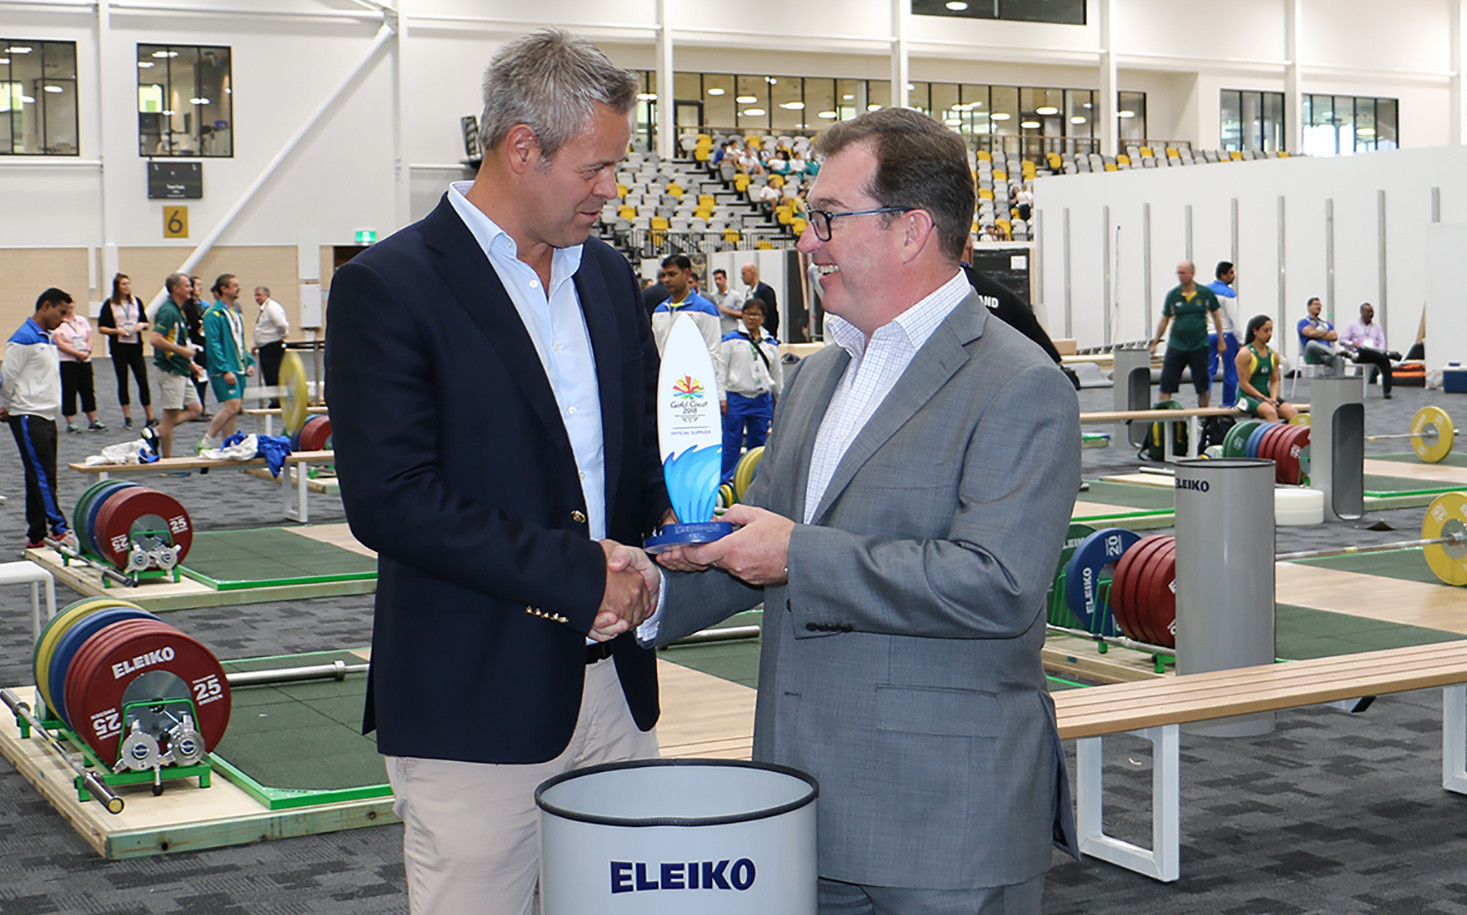 Eleiko selected as weightlifting and powerlifting equipment